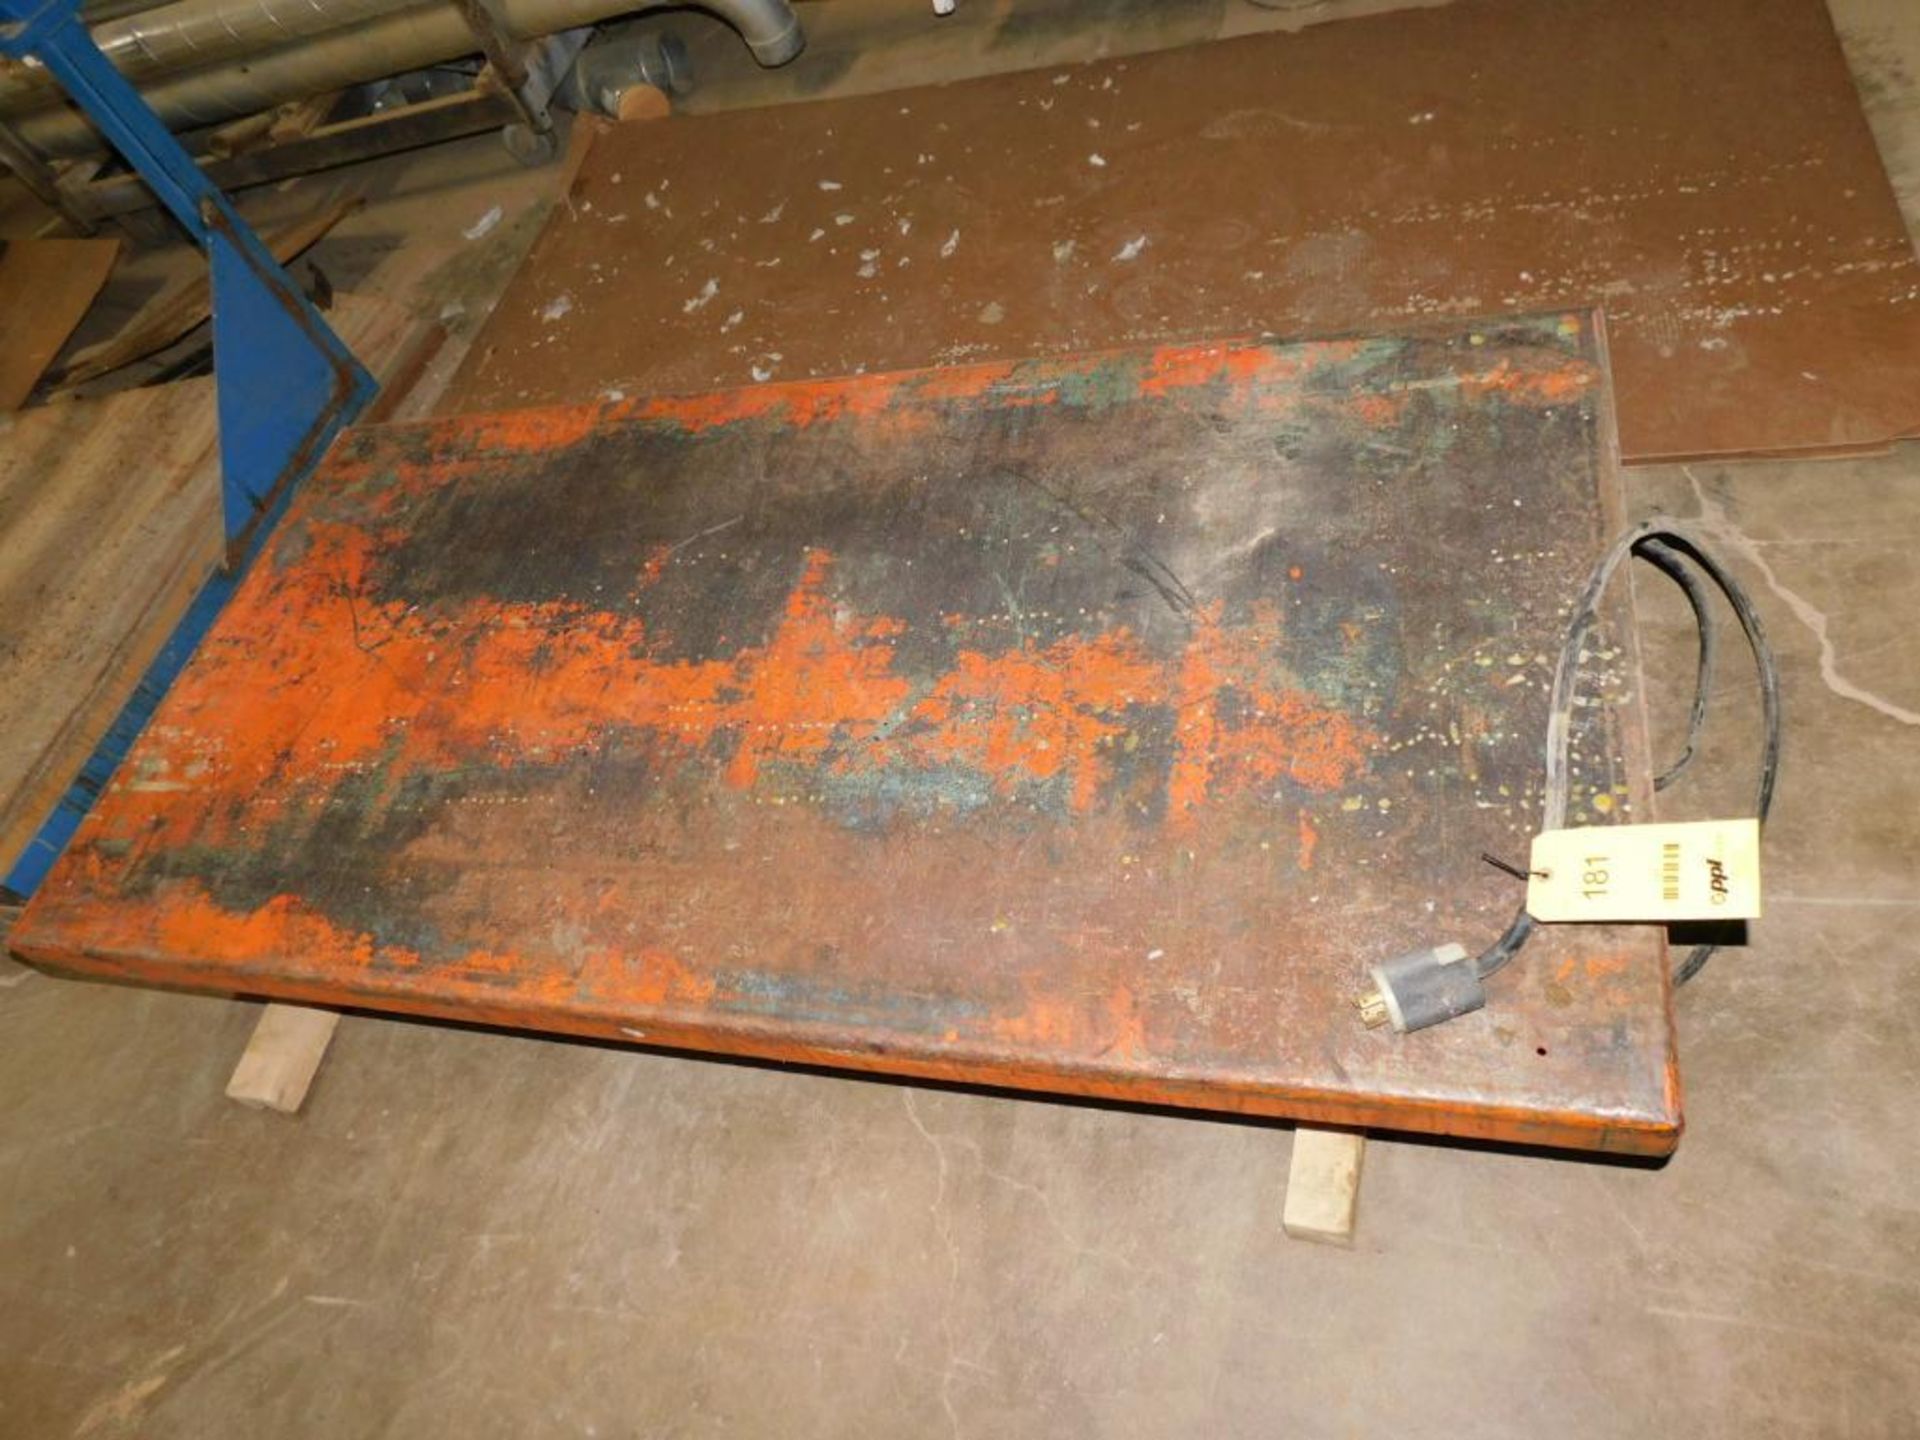 36" x 72" Hydraulic Lift Table (NEEDS CONTROL) - Image 2 of 2